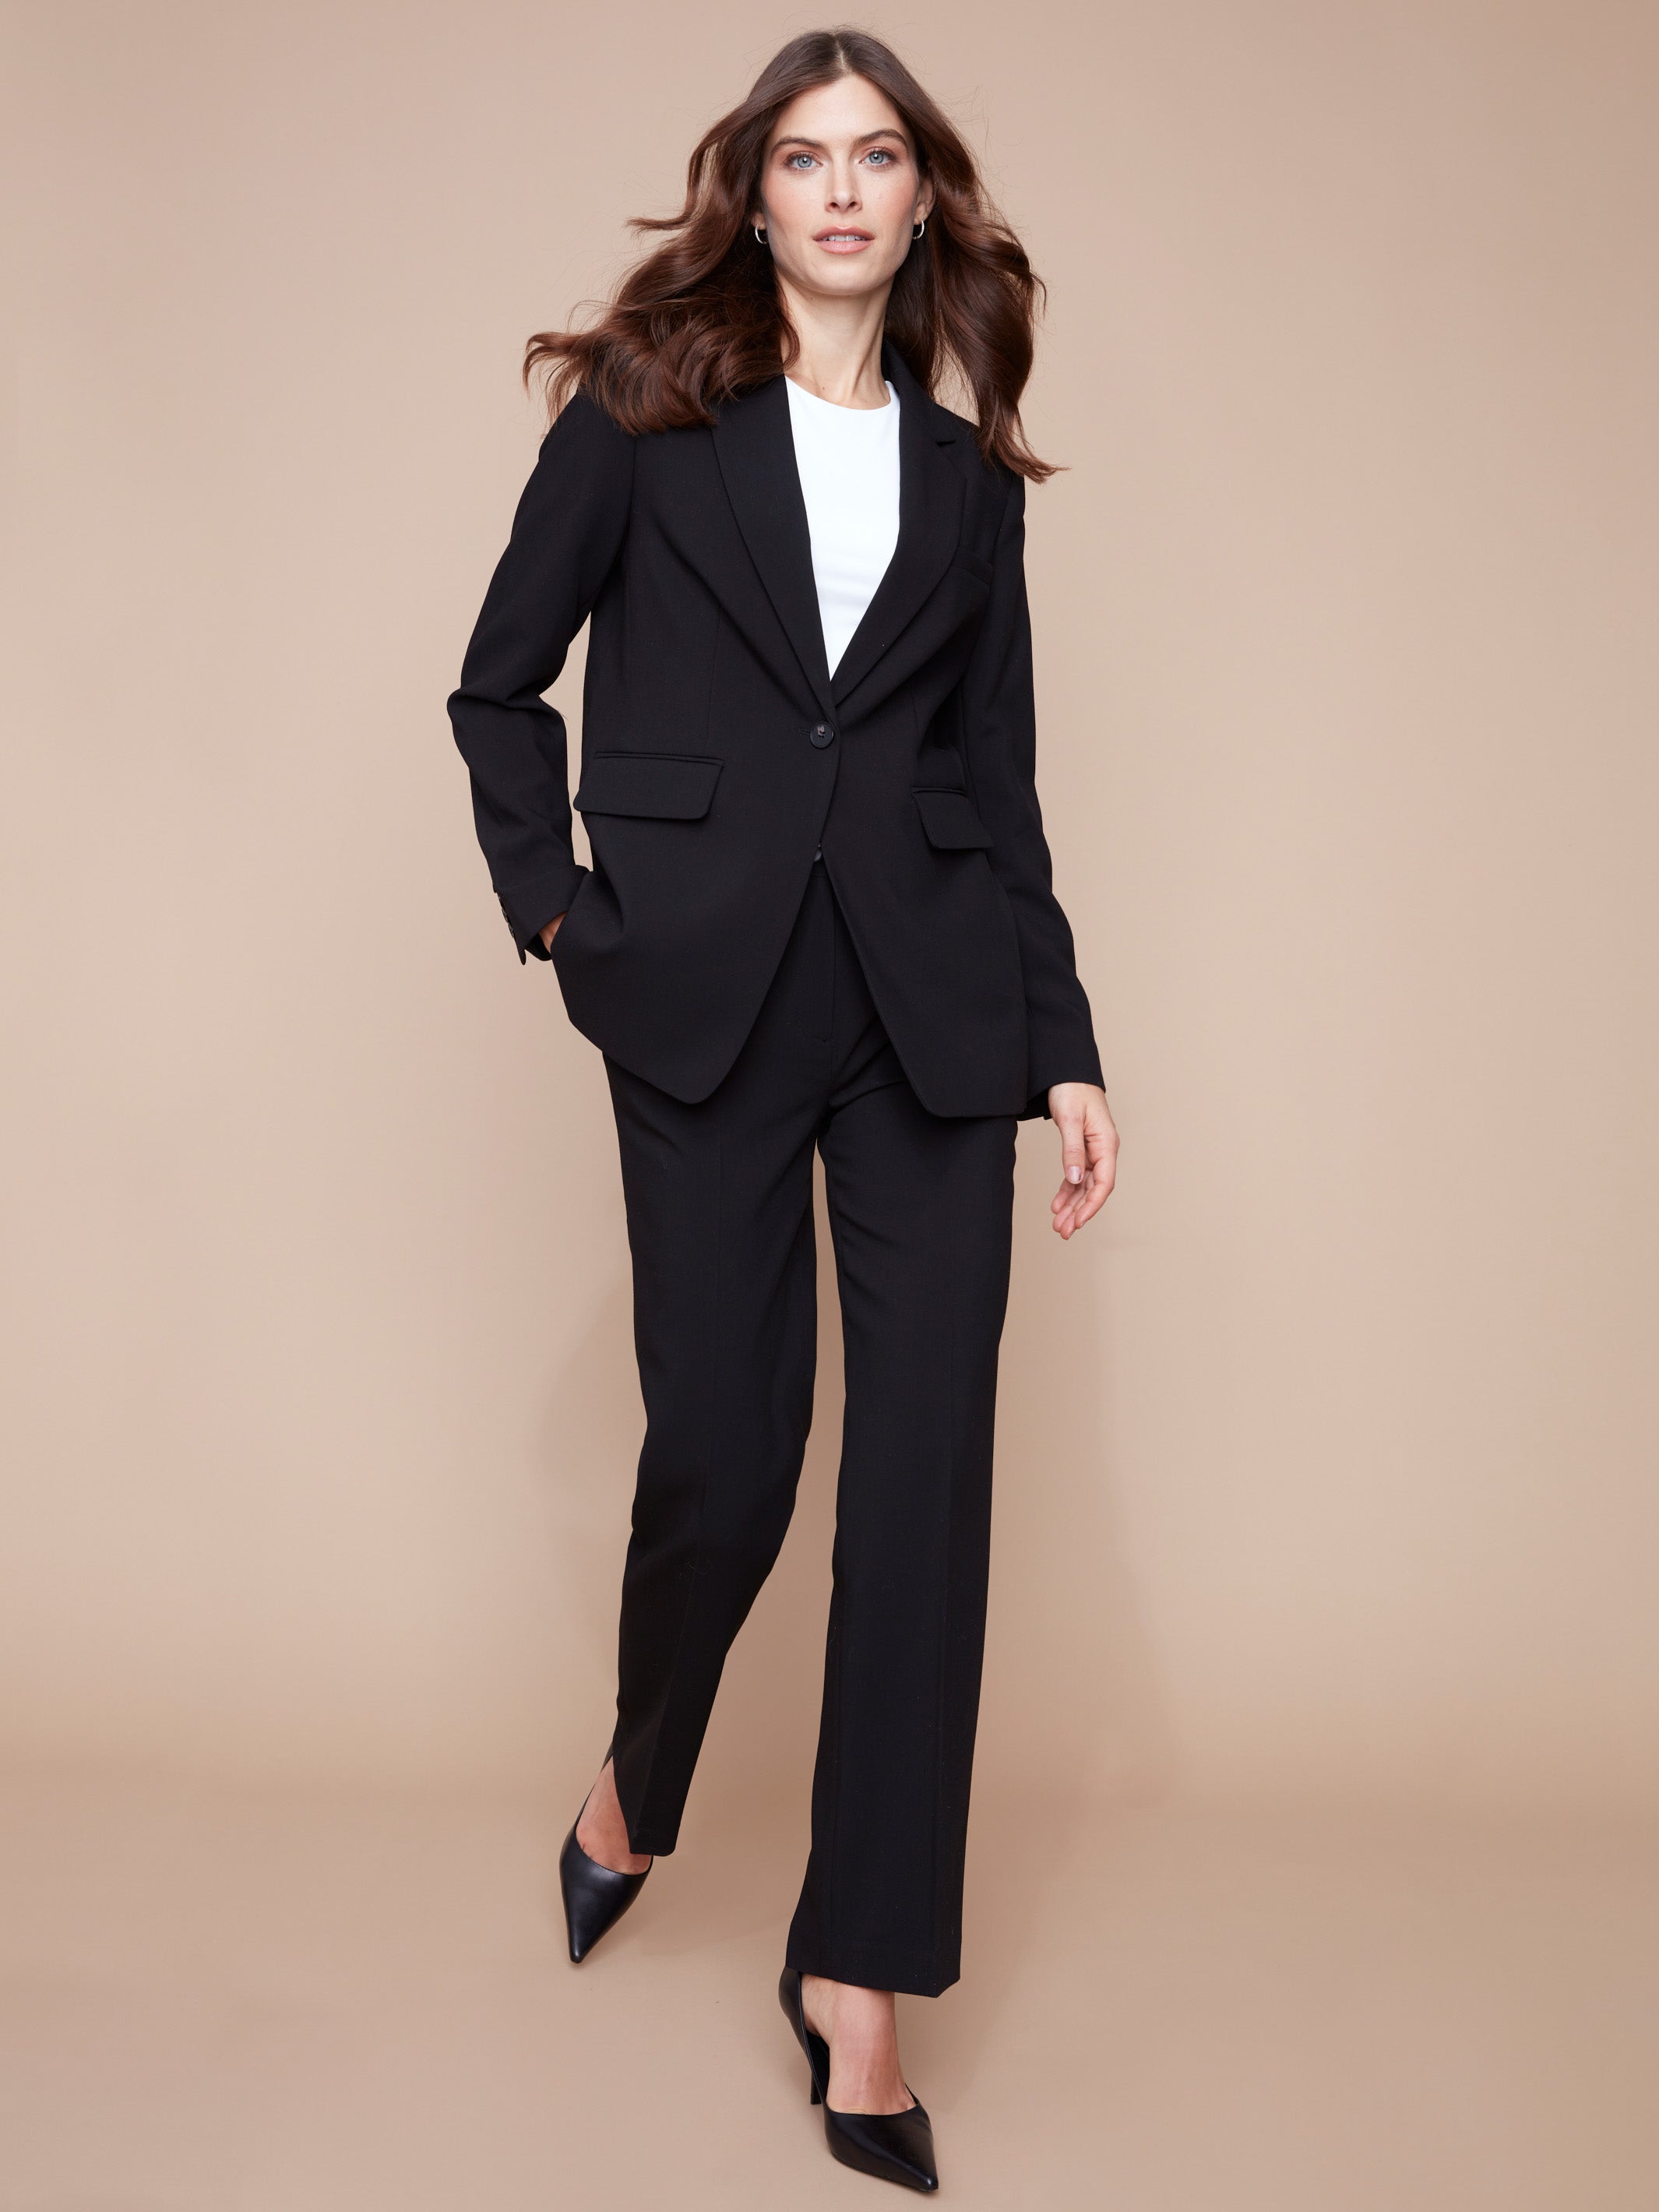 Women's Workwear Collection - Blazers, Pants, Tops & Outfits for Work - Charlie B